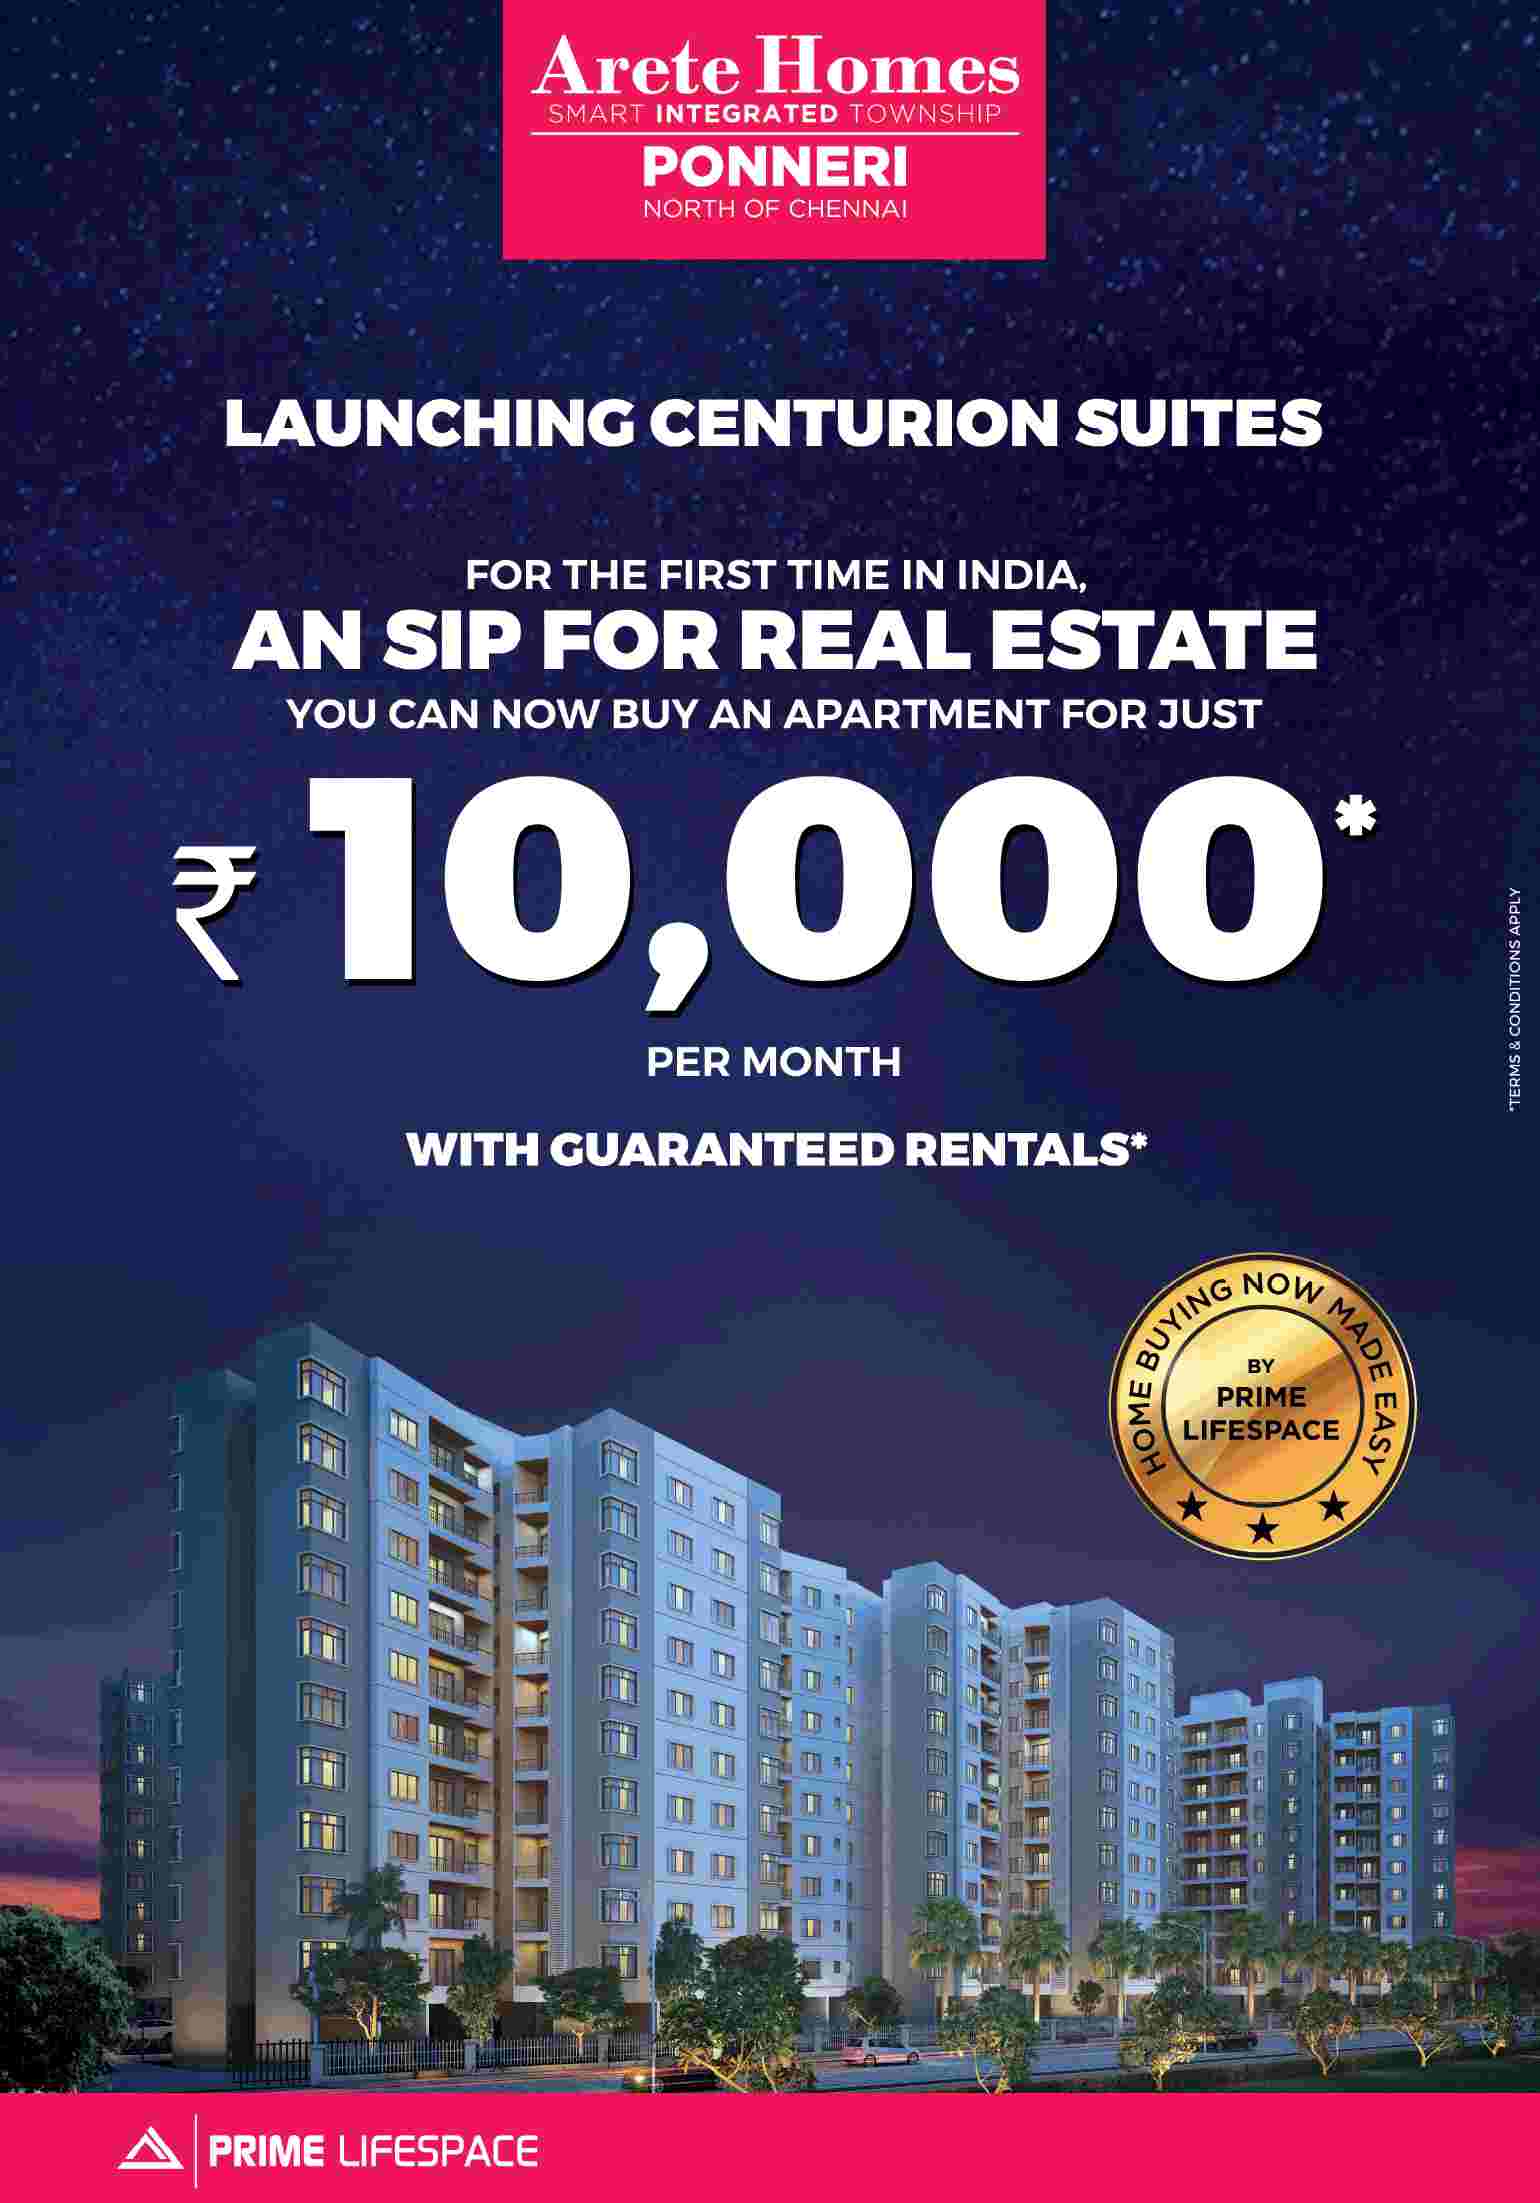 Buy home for just Rs. 10,000 per month with guaranteed rentals at Prime Arete Homes in Chennai